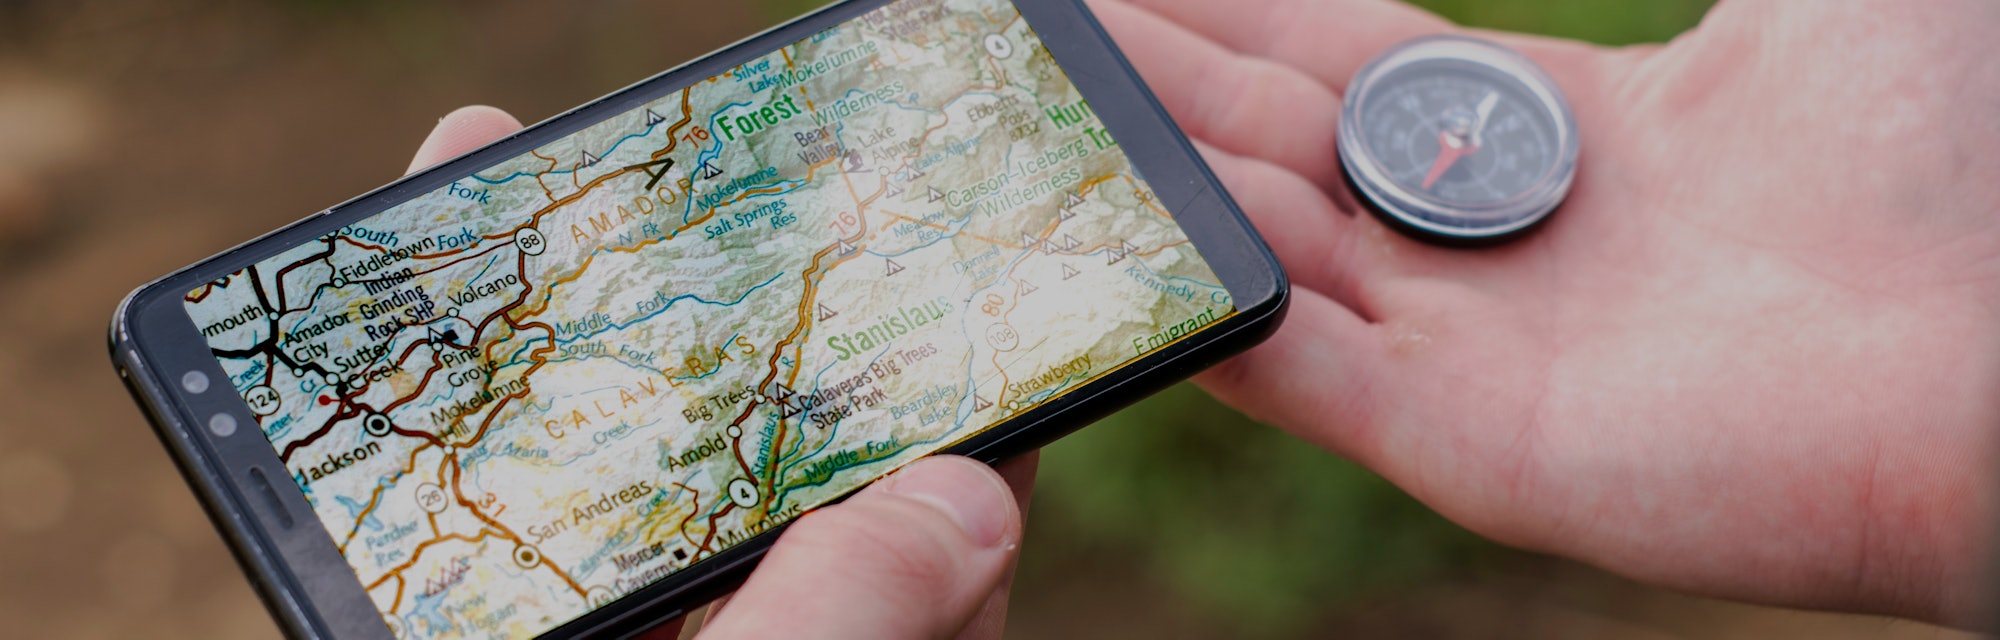 a tourist navigates the terrain holding a compass and a smartphone with a map concept tourism travel...